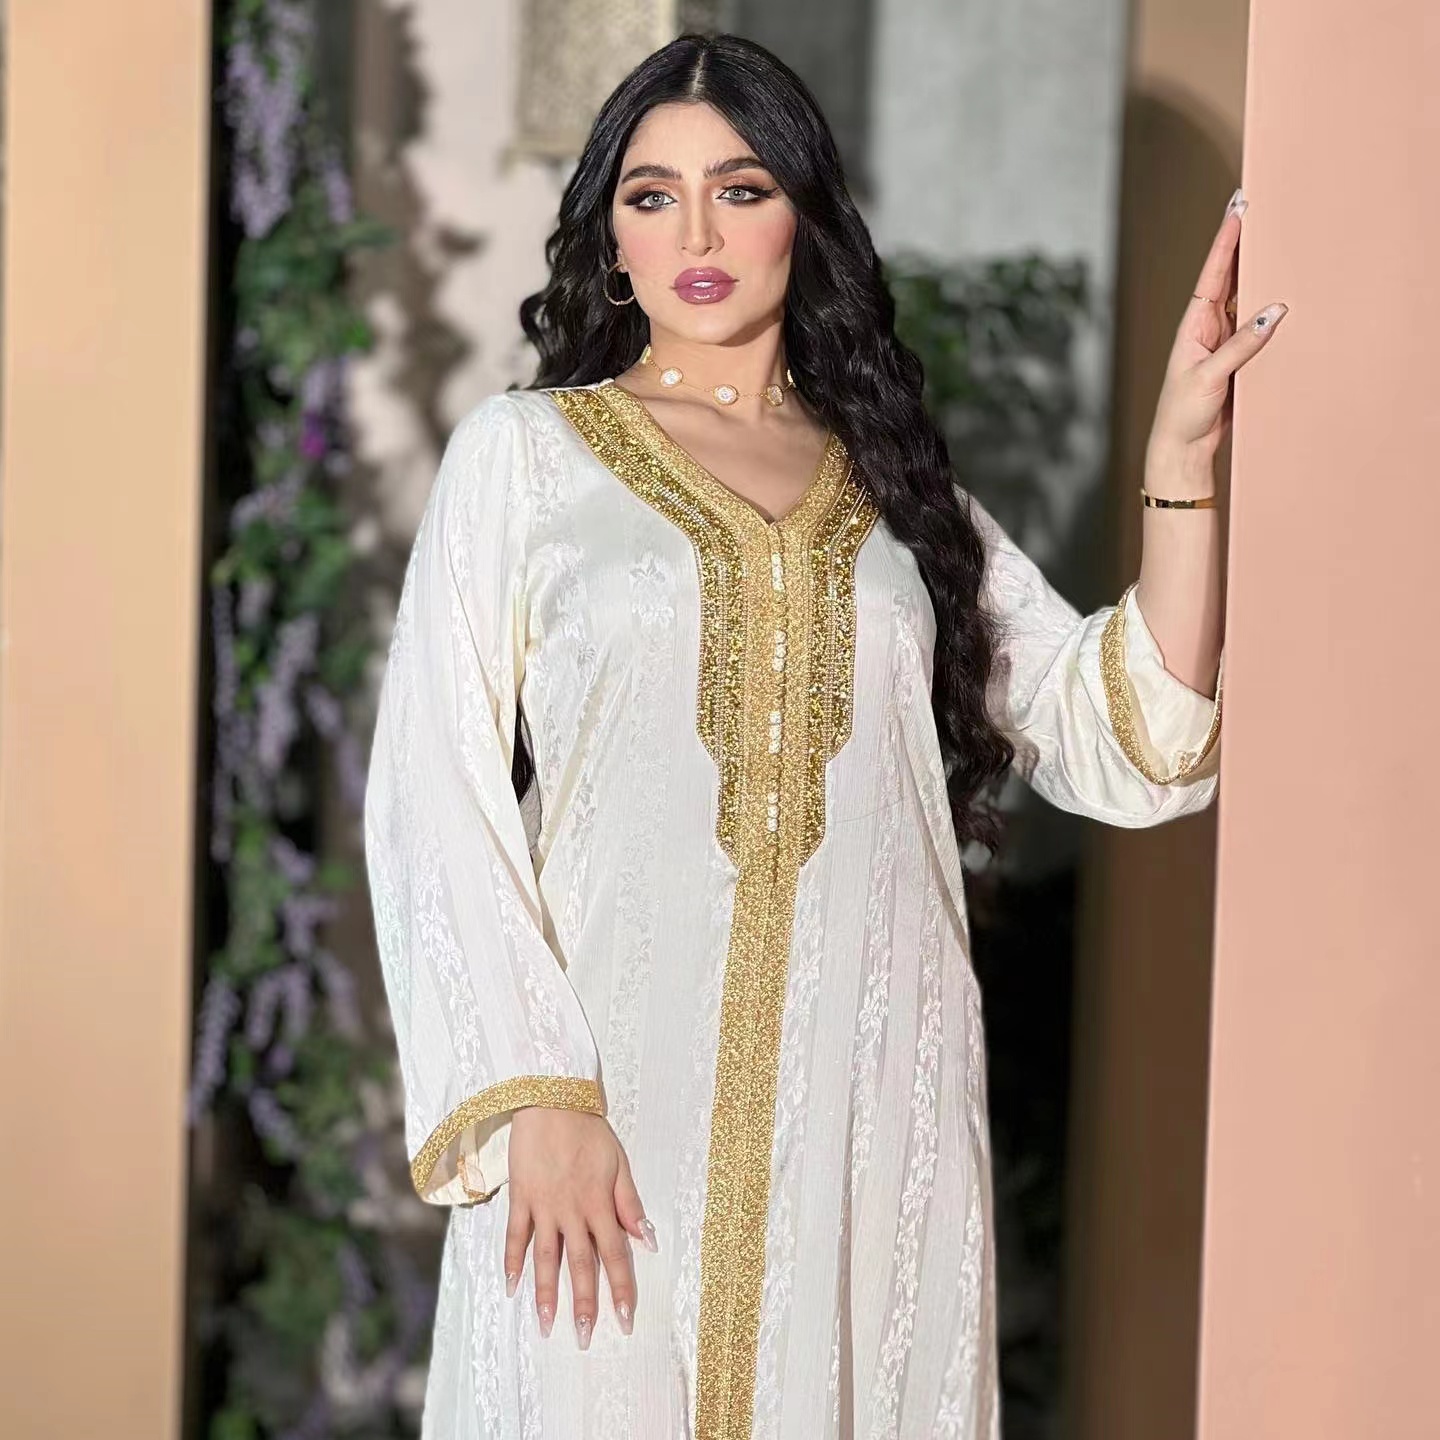 Muslim Special Occasion Dresses Middle Eastern women's dress burrito lace white satin jacquard evening gown new party BT205